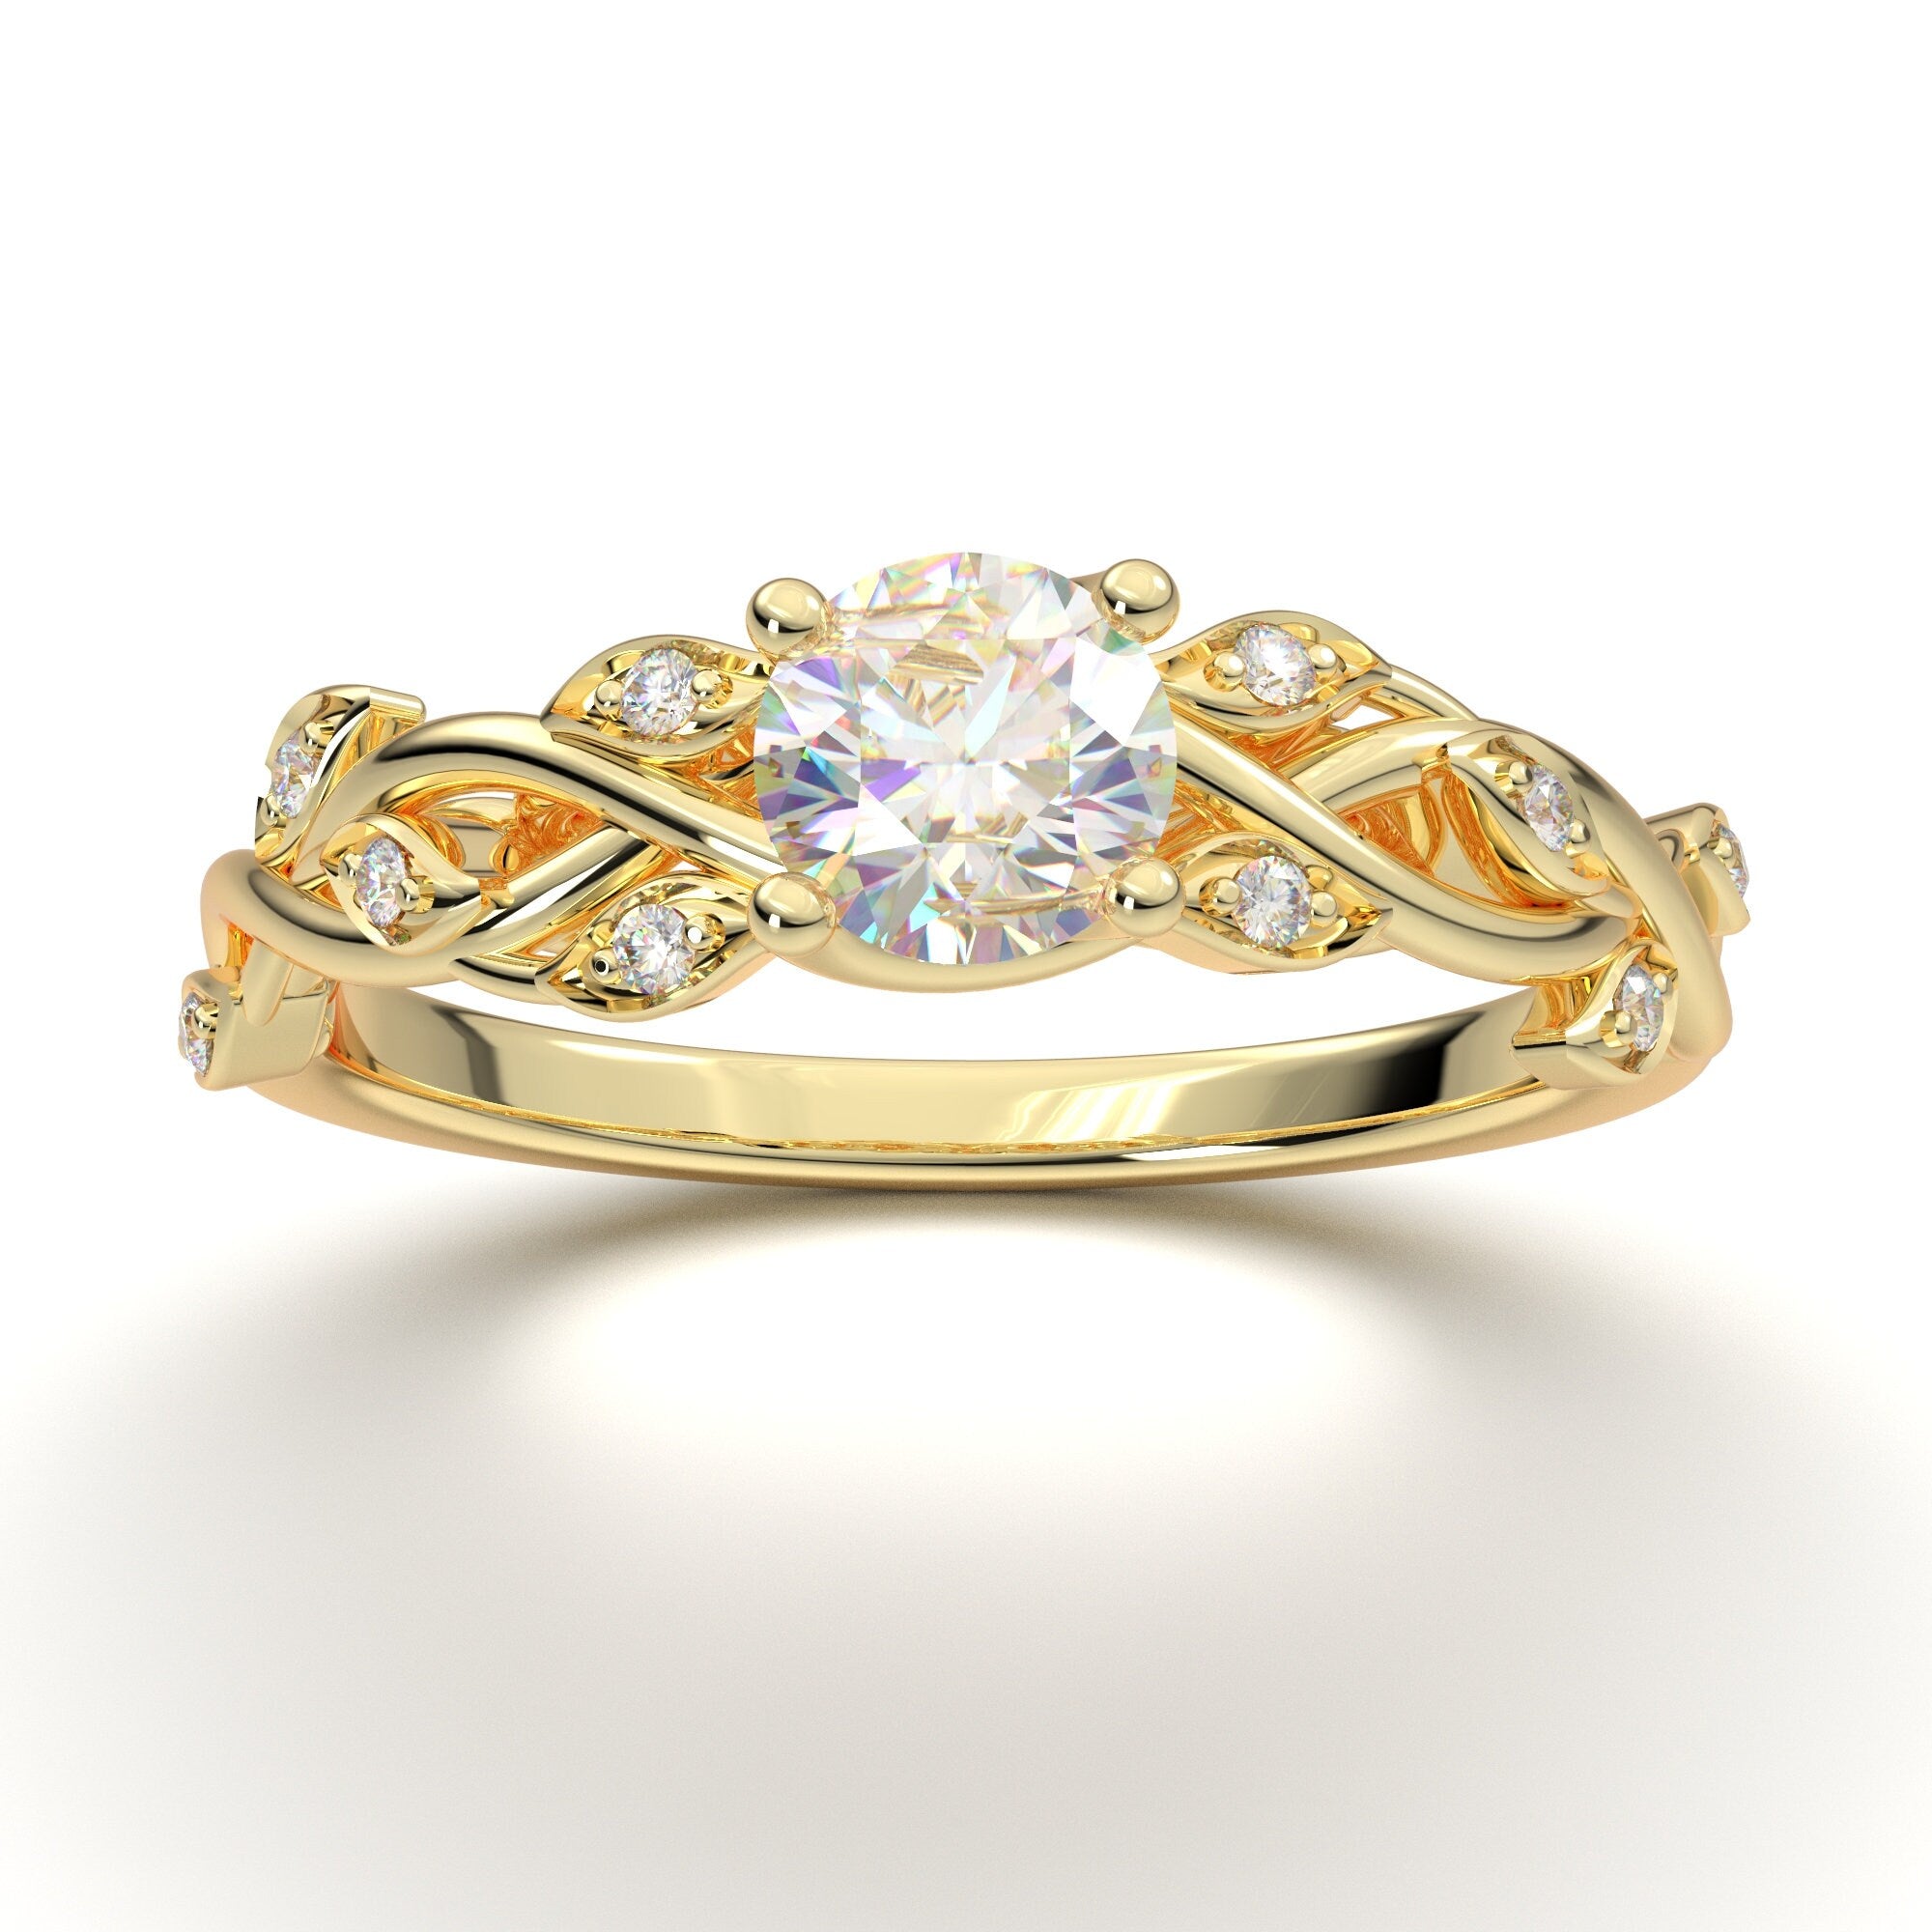 Modern 14K Yellow Gold Designer Wedding Ring or Engagement Ring for Women  with 1.0 Ct White Sapphire Center Stone R665-14KYGWS | Caravaggio Jewelry